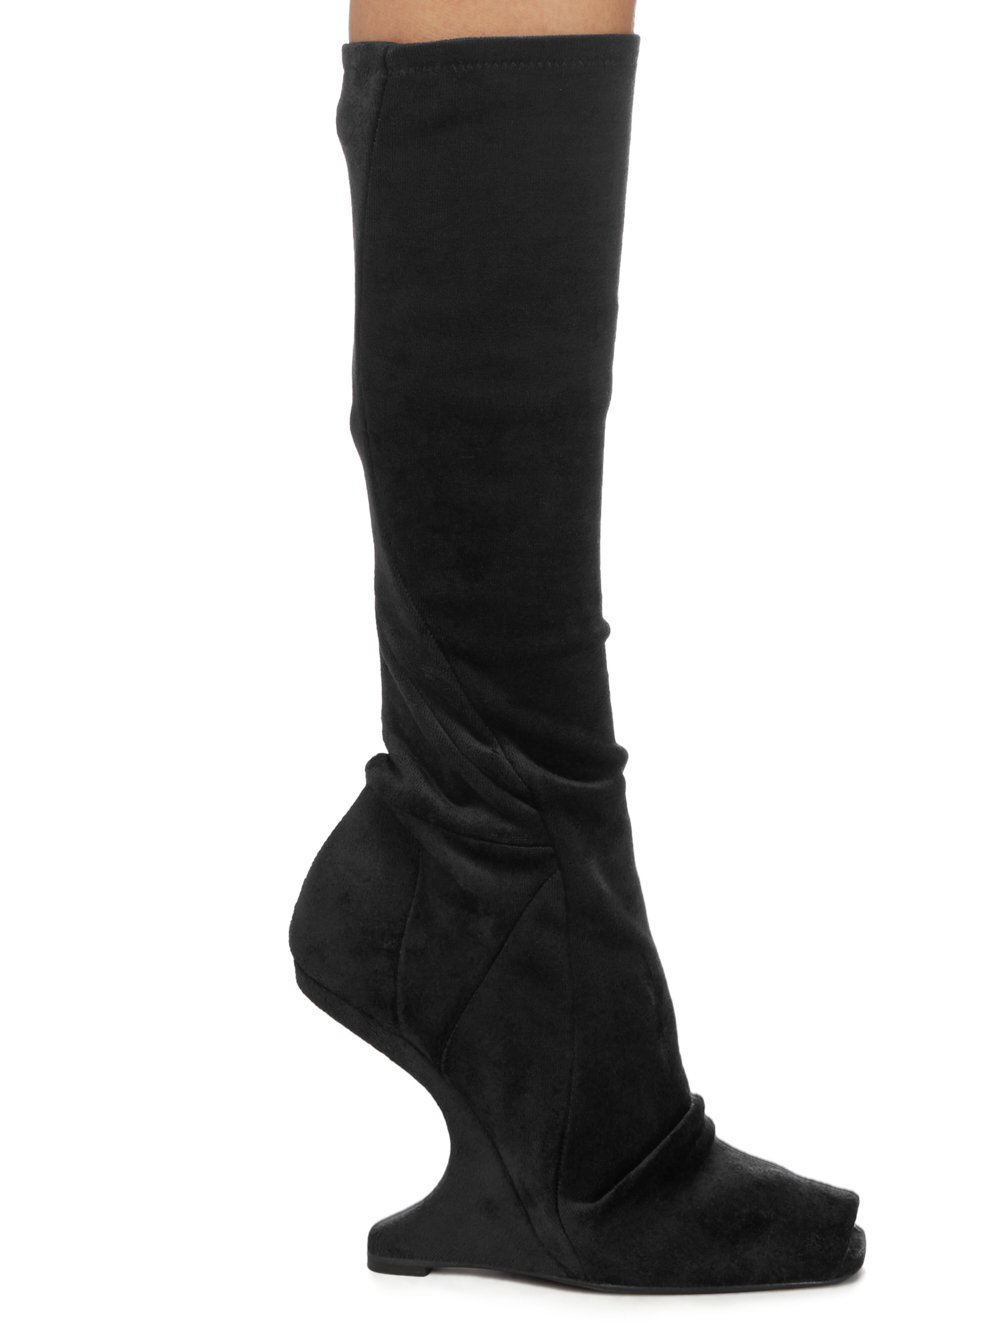 RICK OWENS LILIES FW23 LUXOR CANTILEVER 11 MID CALF BOOT IN BLACK VELVET JERSEY